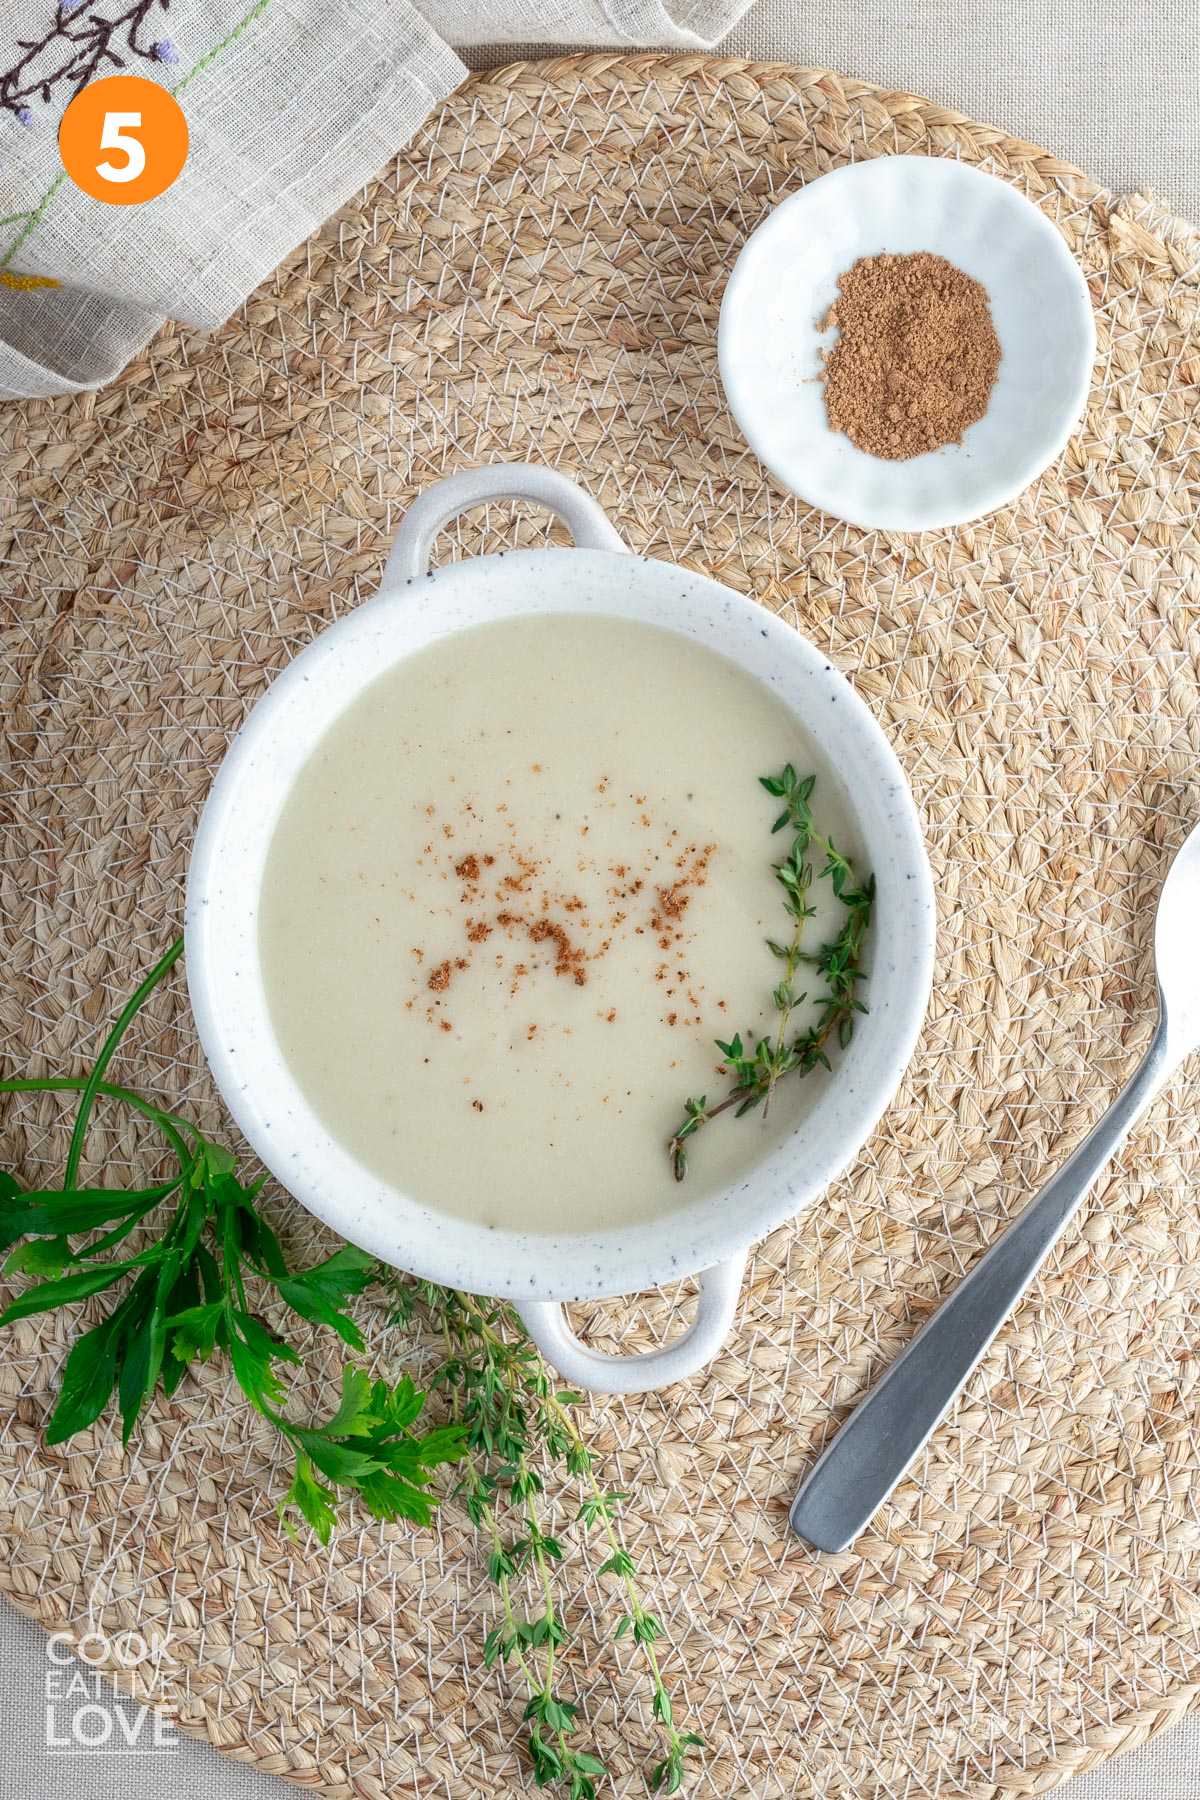 Vegan bechamel sauce served up in a small bowl on the table with fresh thyme on top and some parsley on the table.